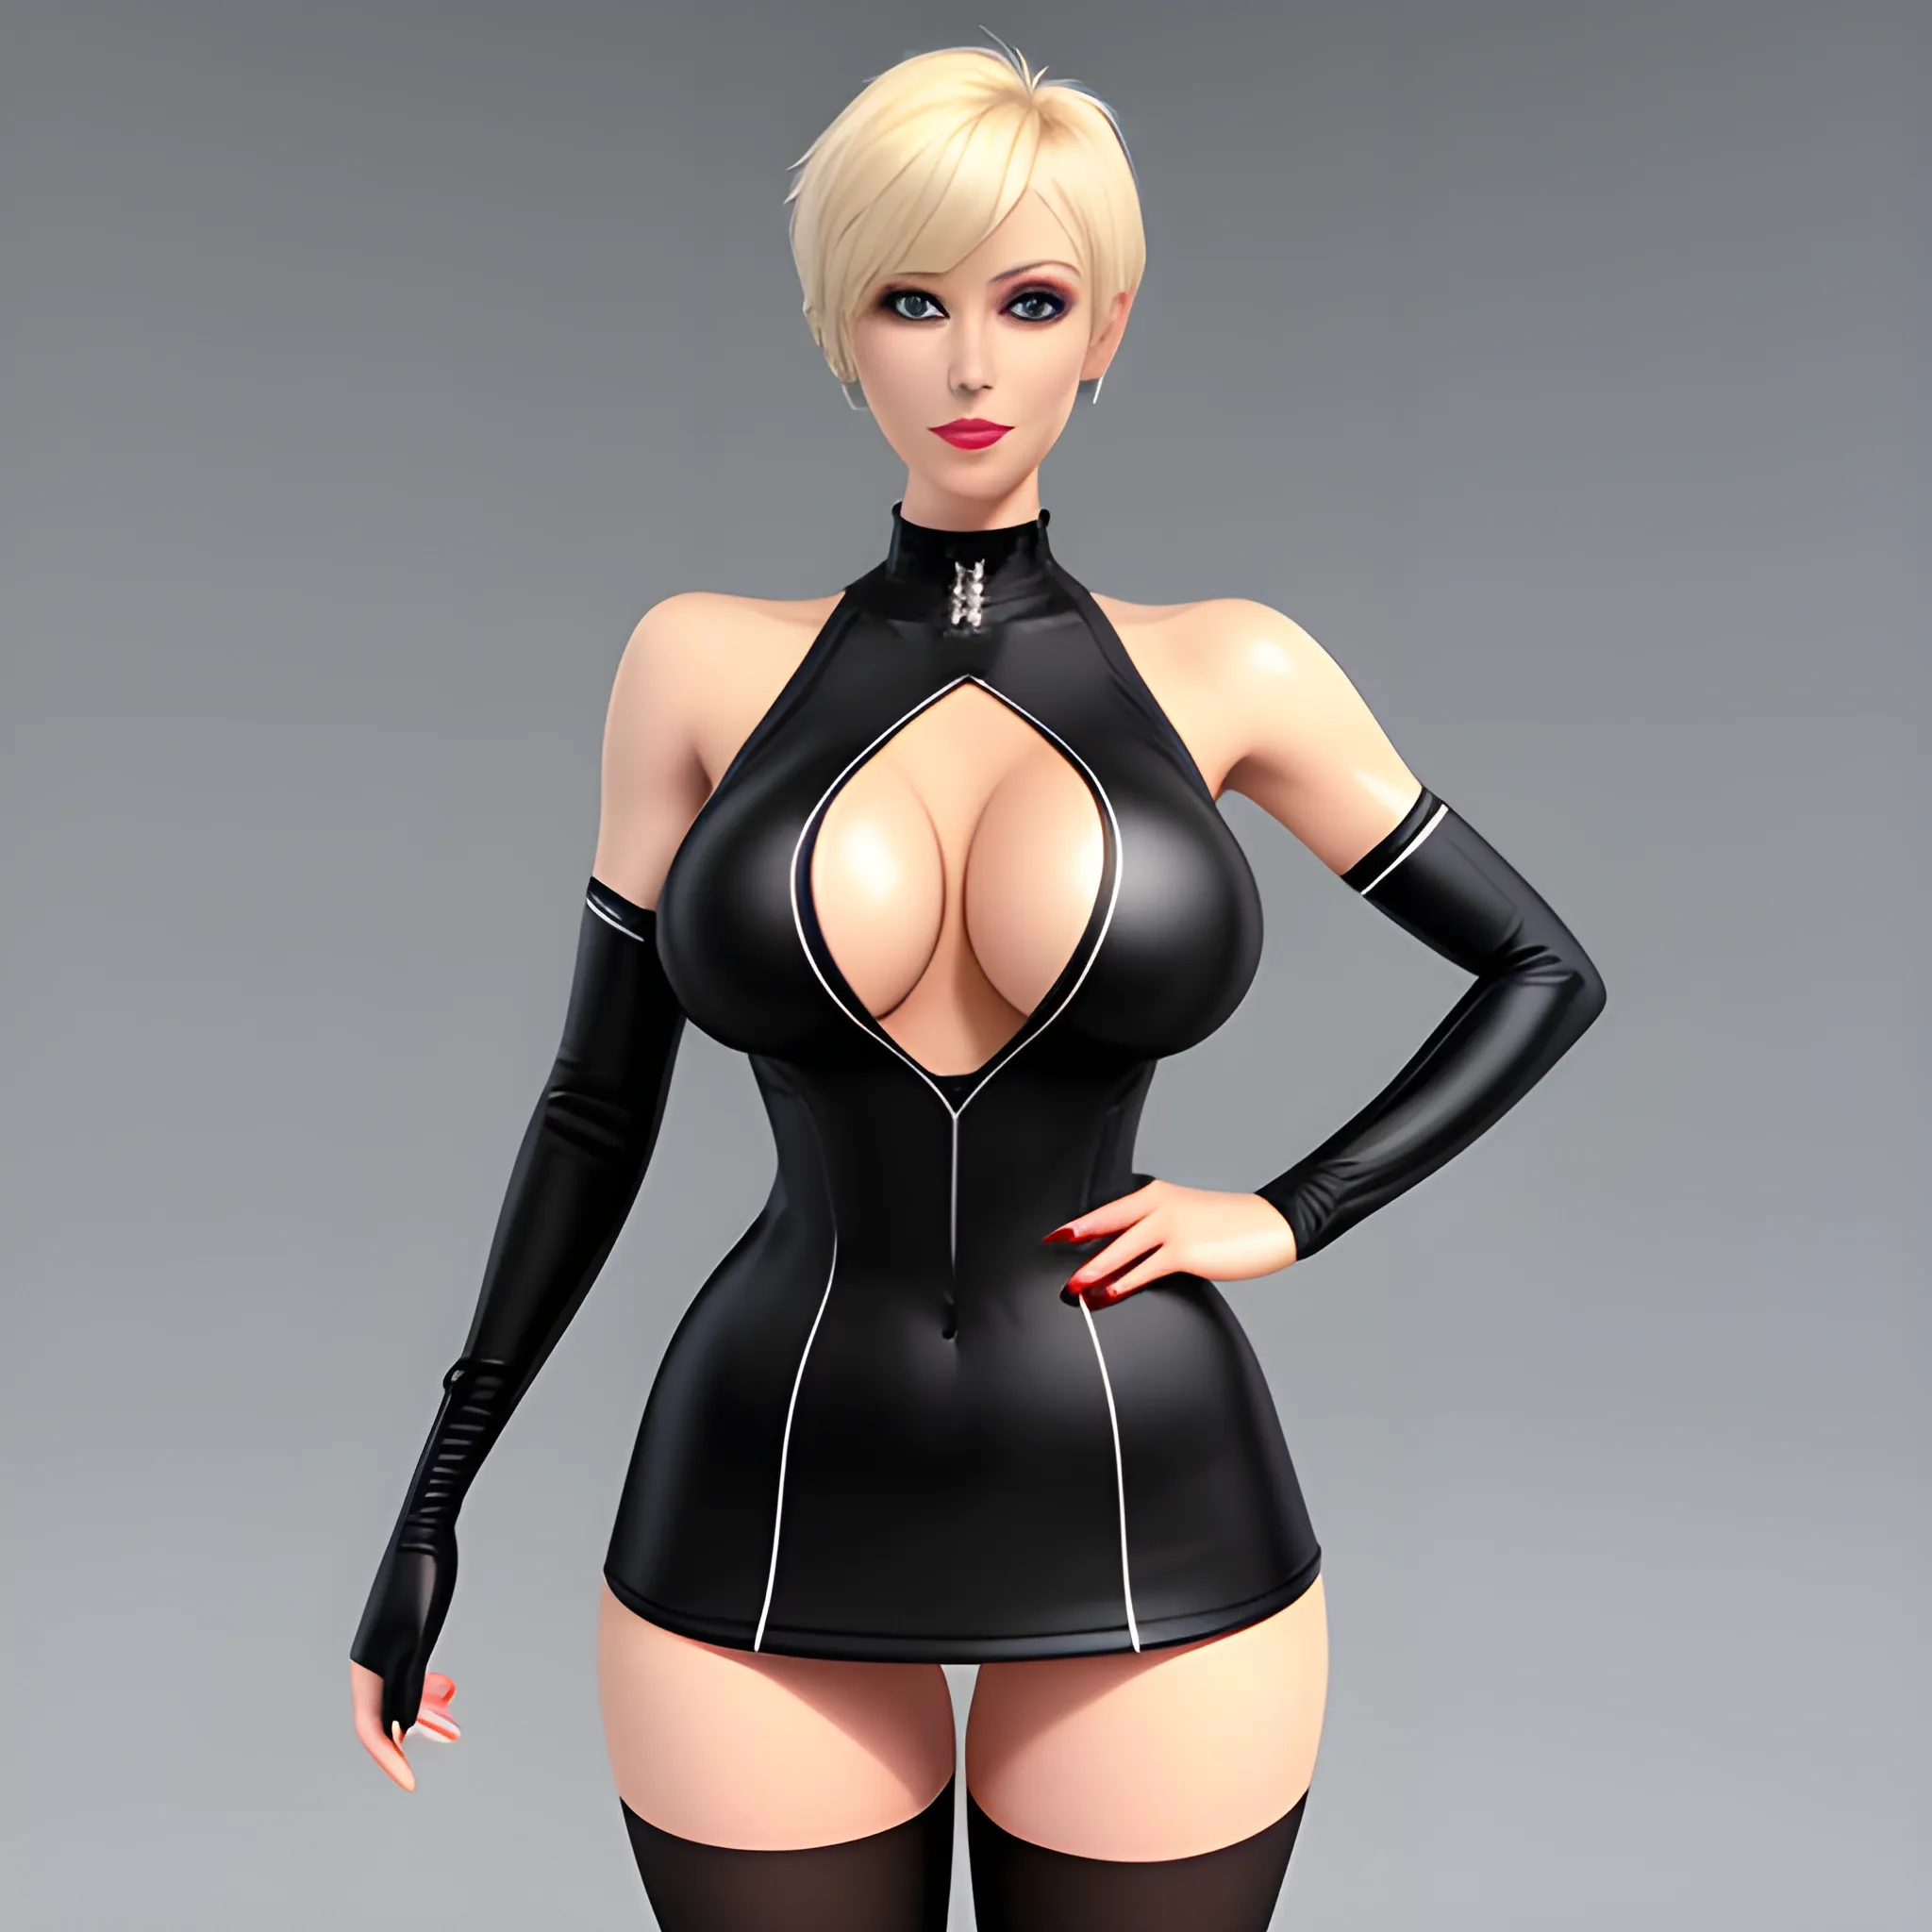 1 girl, short blonde hair, blue eyes, pierced left eyebrow, D-cup breasts, wide hips, toned thighs, six pack, white long-sleeved top with black stripes mid-length, black skirt, black pantyhose, black sneakers, 3D